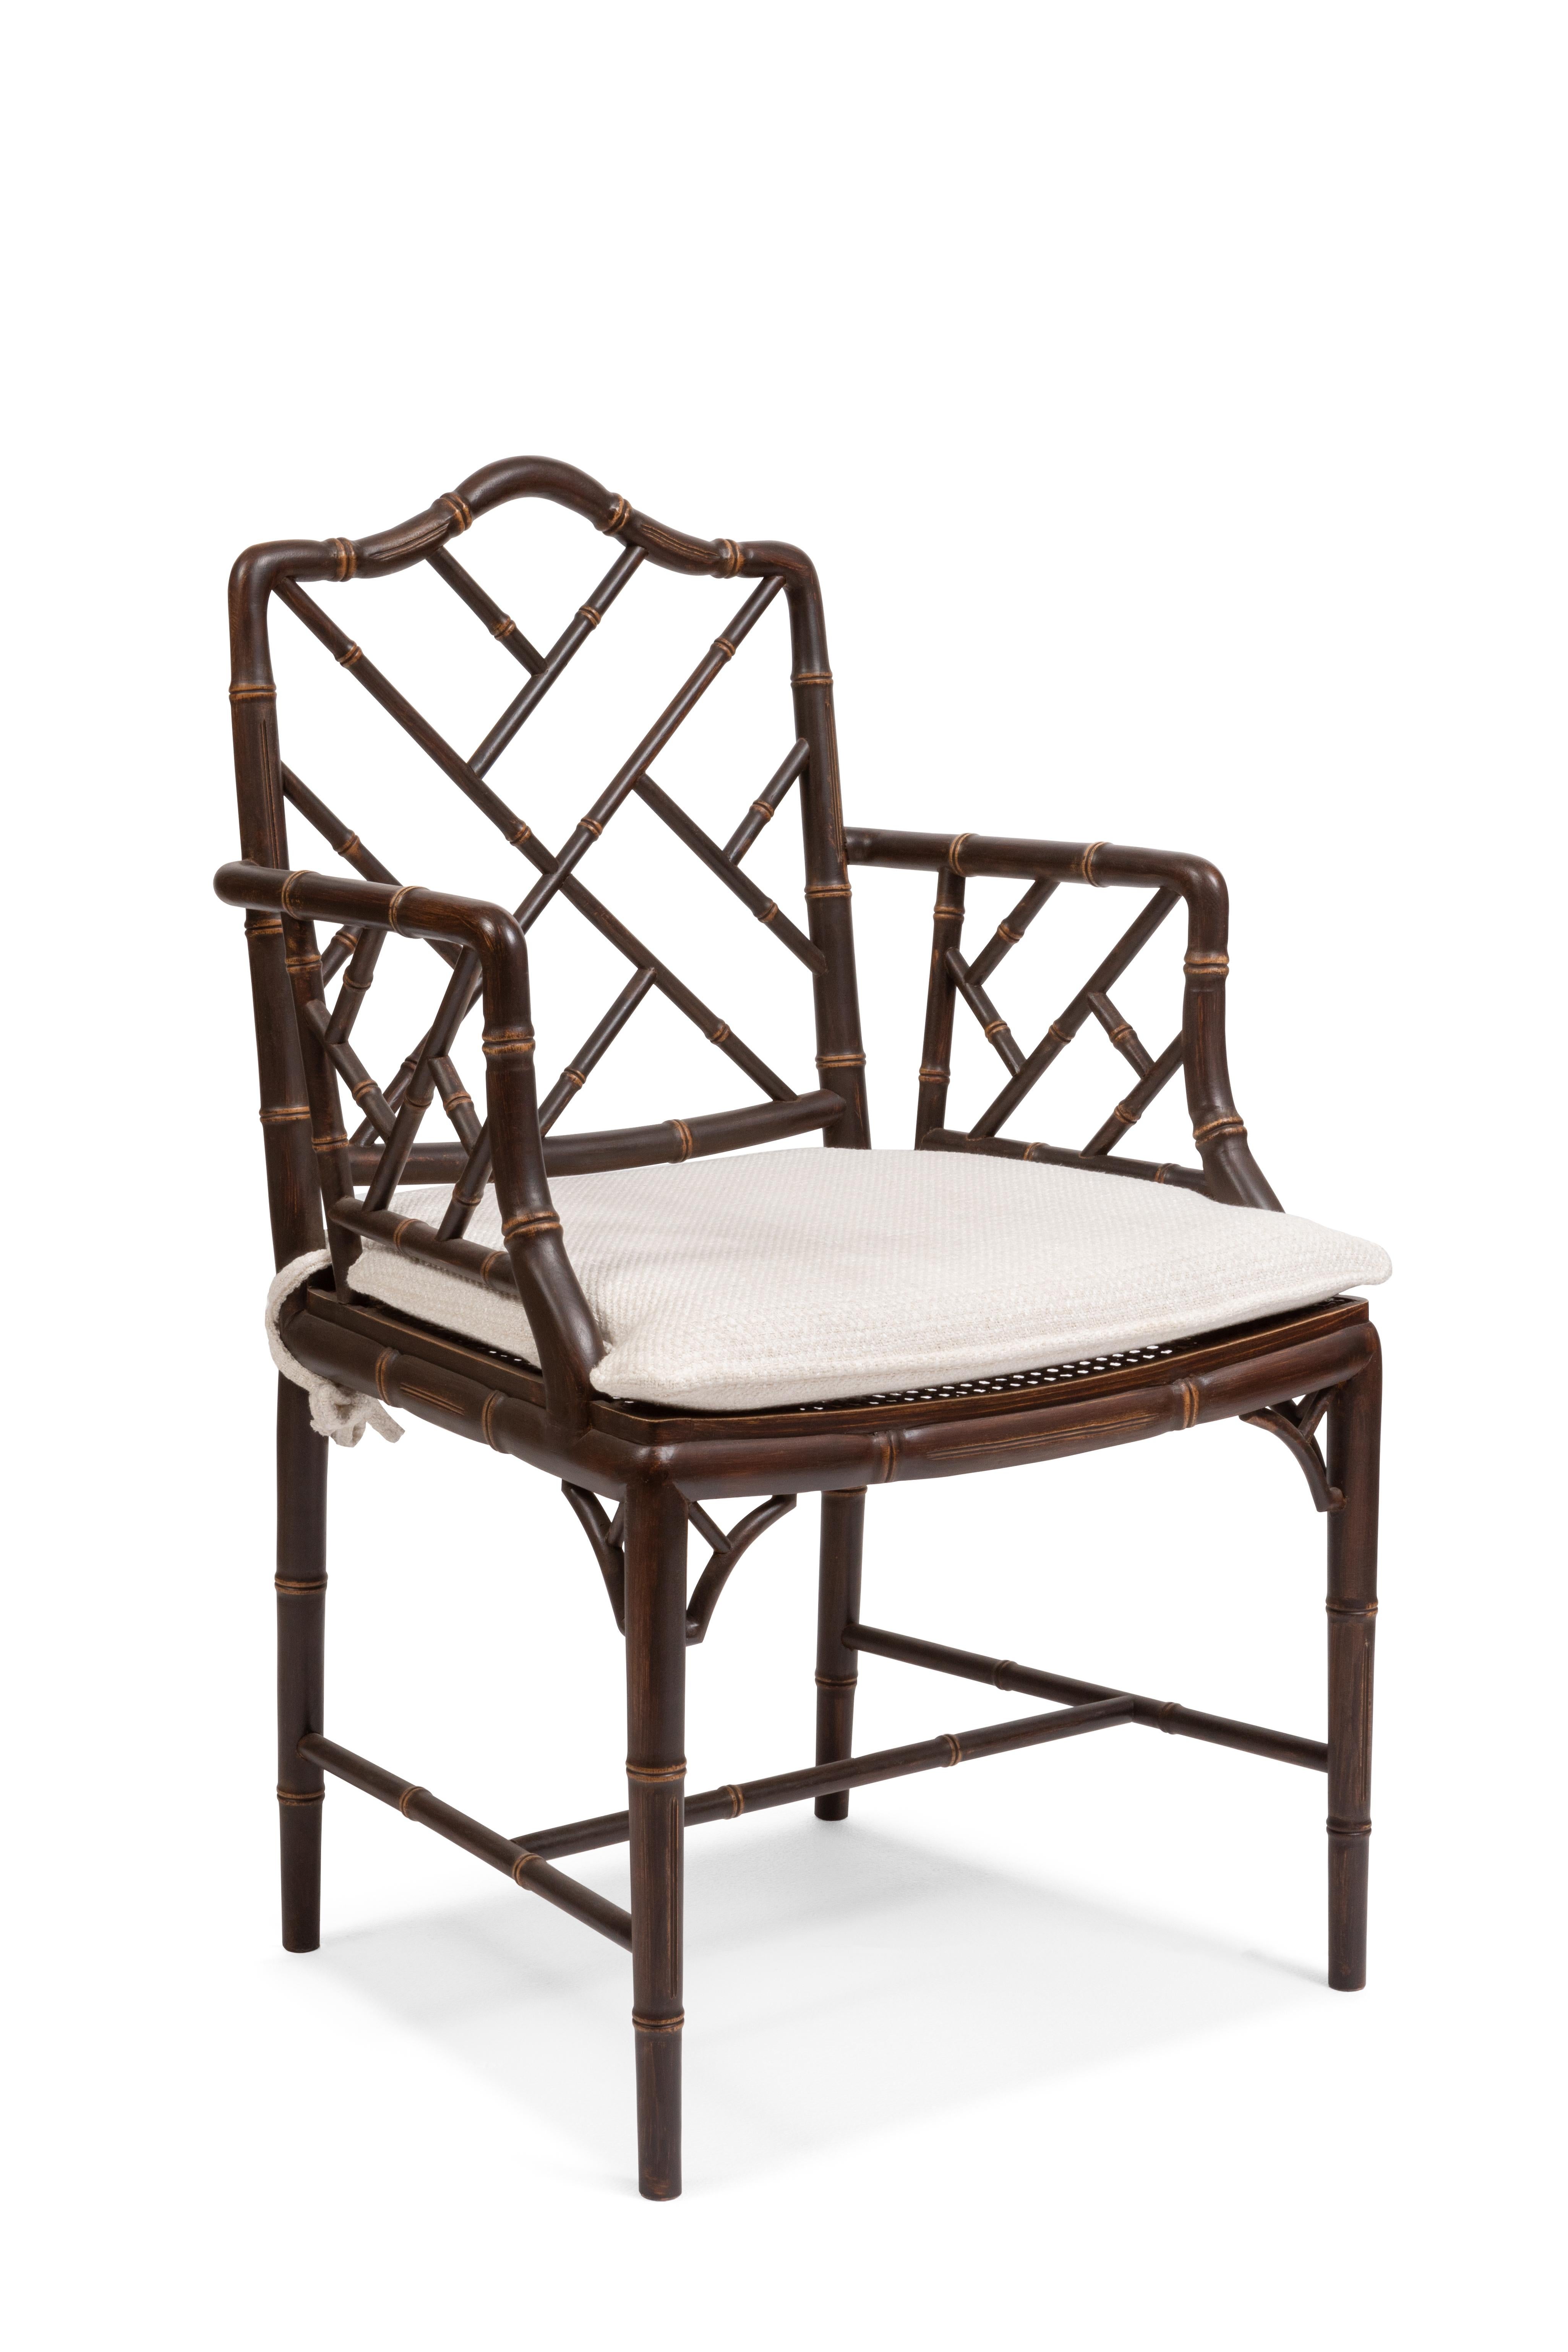 Wood chair with armrests, Chinese Chippendale Style inspired. This armchair belongs to 